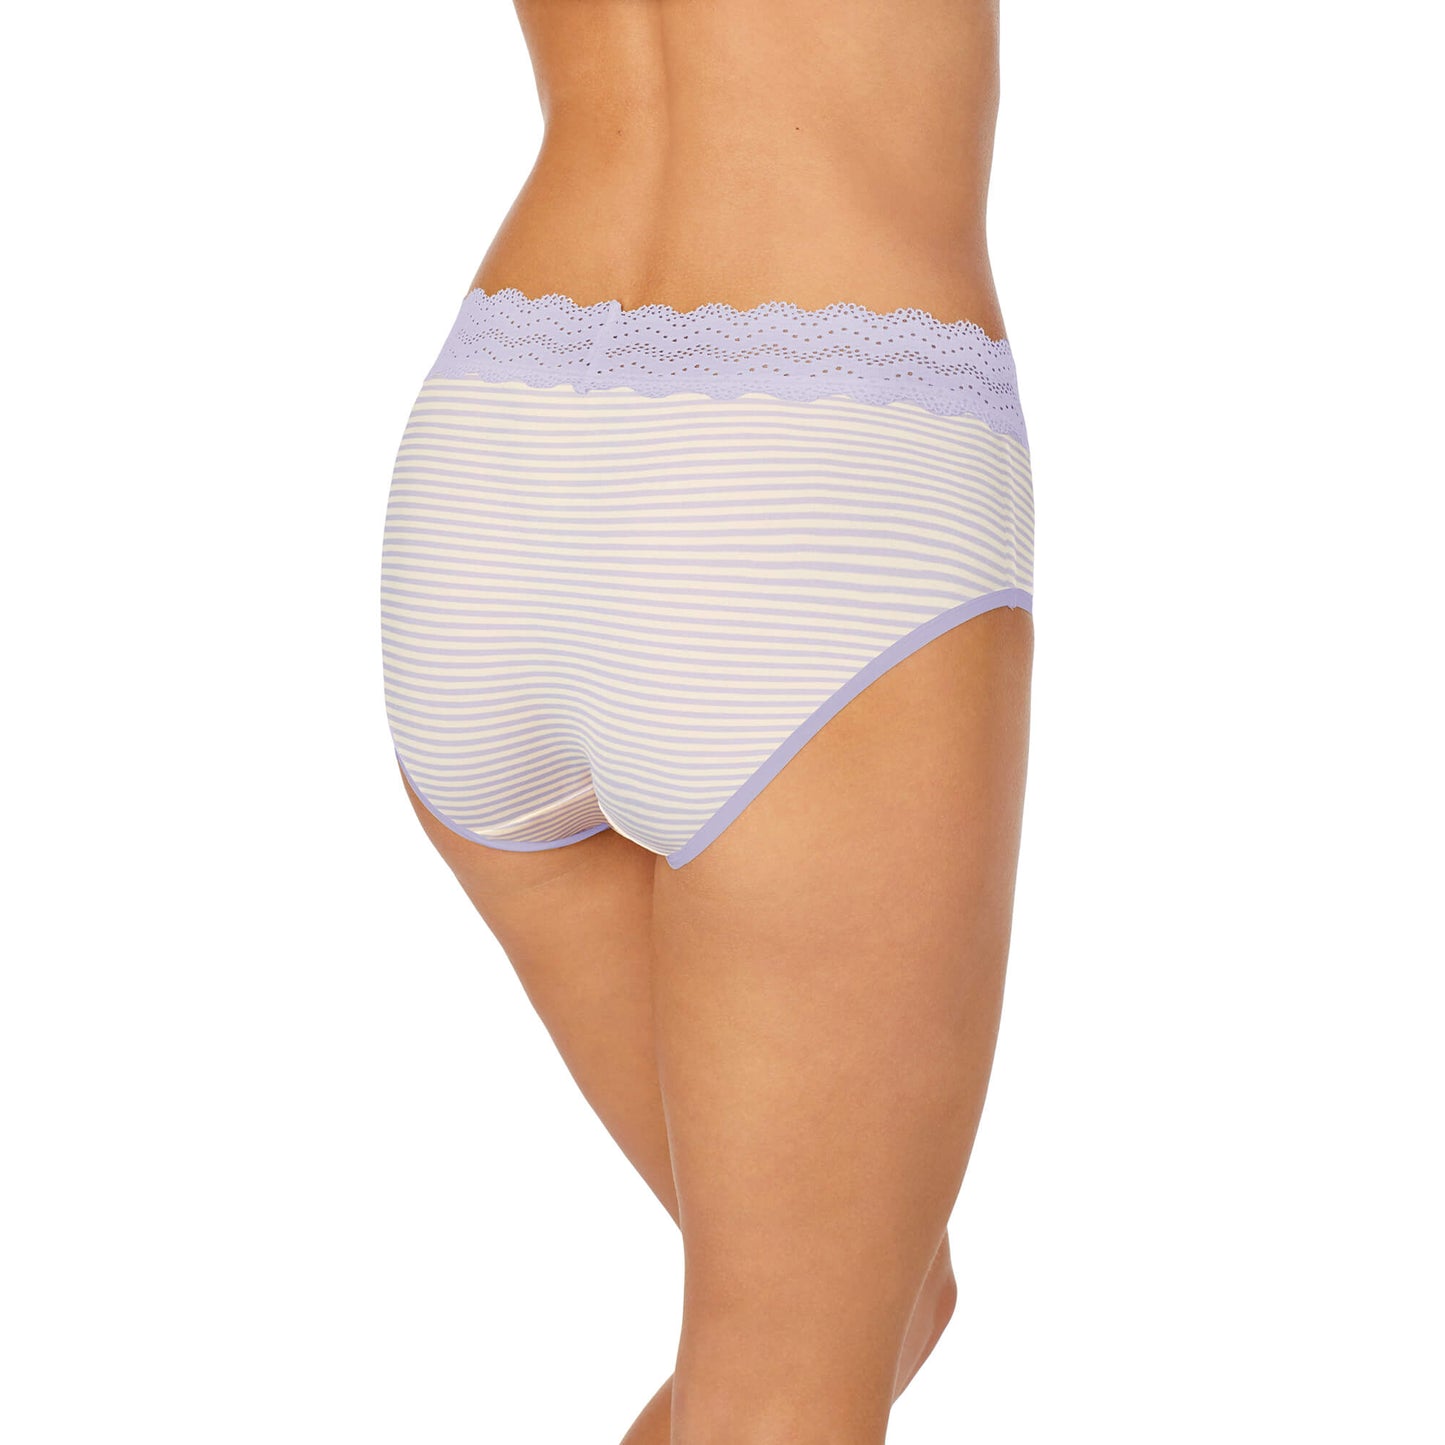 Lavender Stripe;Model is wearing a size S. She is 5' 10", Bust 34", Waist 26", Hips 38"@A lady wearing  Lavender Stripe smooth brief panty with lace.